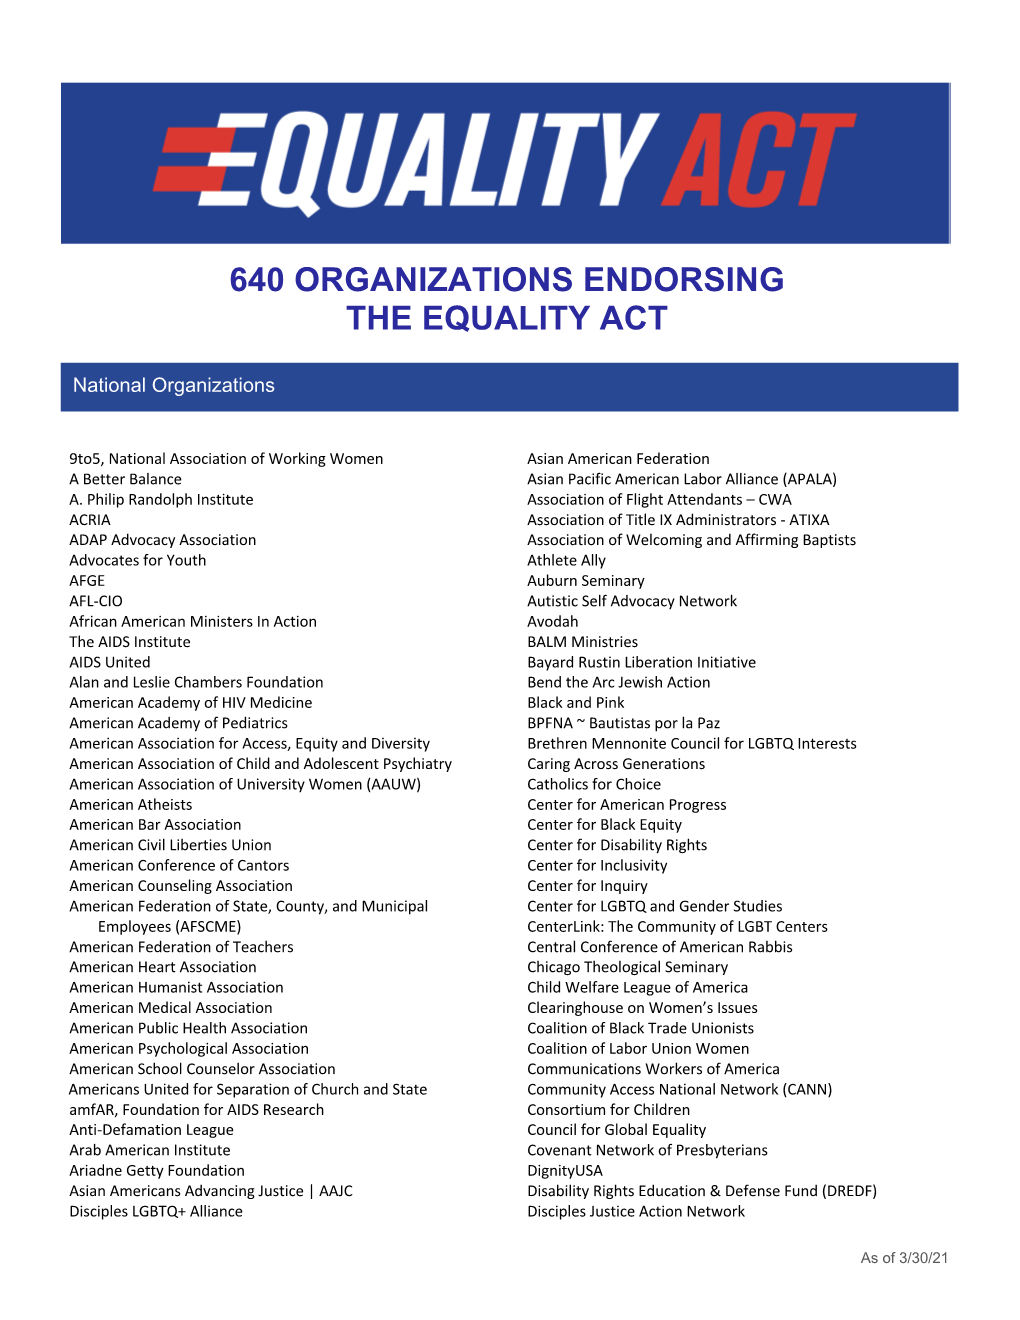 640 Organizations Endorsing the Equality Act